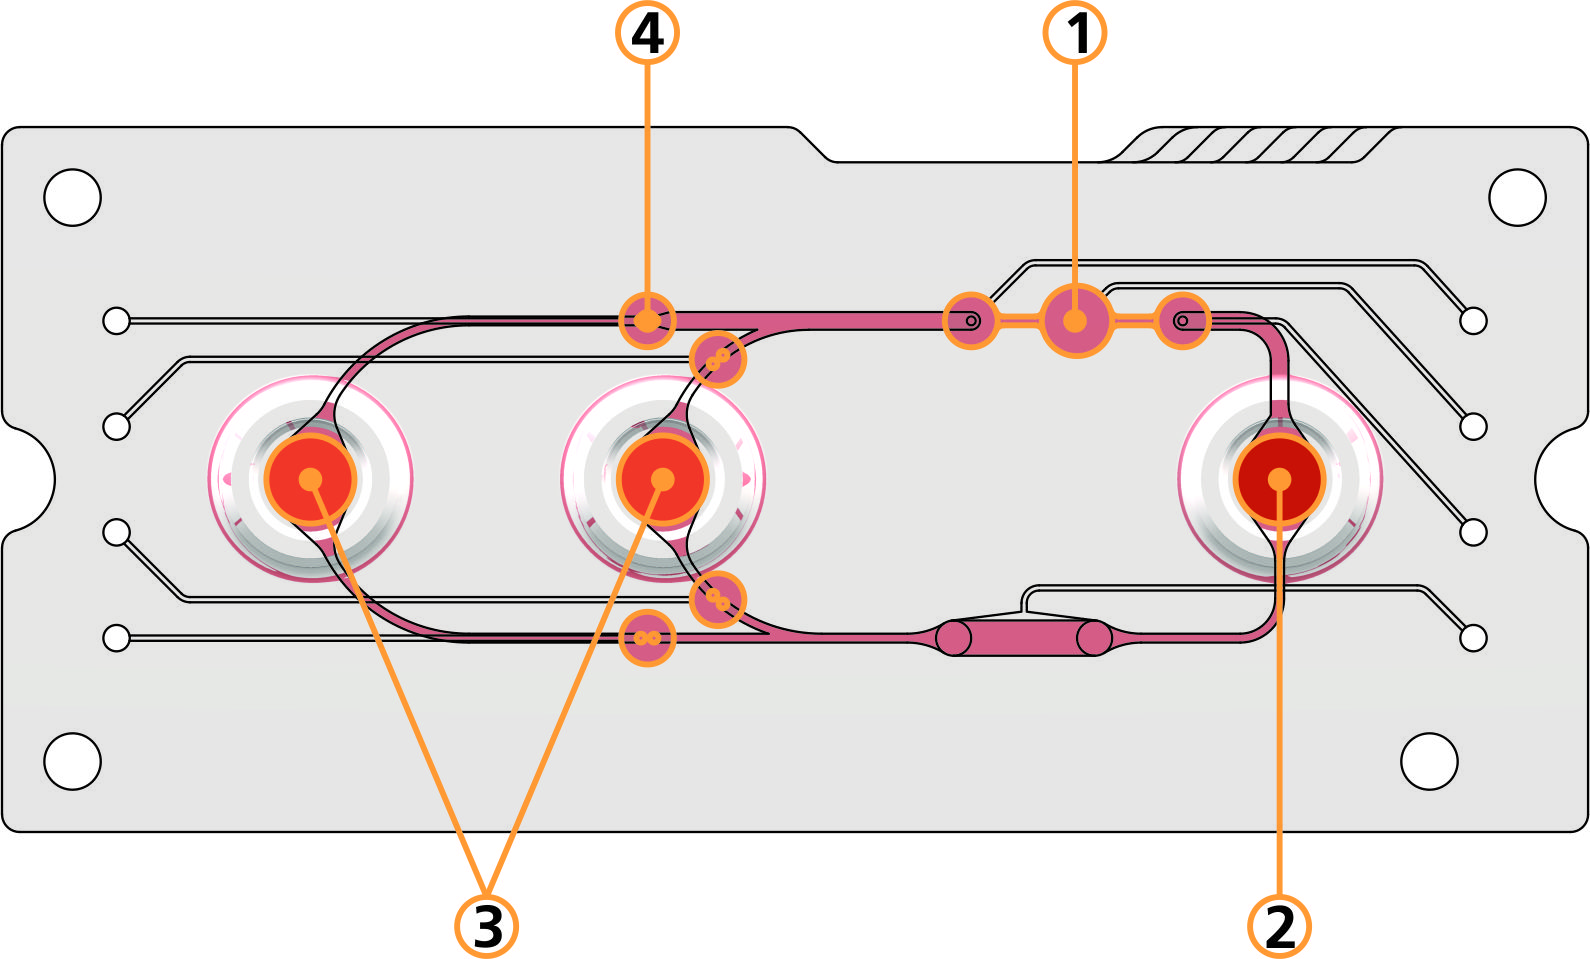 On the multi-organ chip, several technical components simulate the interaction of blood circulation and organs in the human body. These include a pump (1), a storage chamber for blood and substances (2), chambers for organs and tissues (3) and valves, which simulate the varying blood flow to different organs.